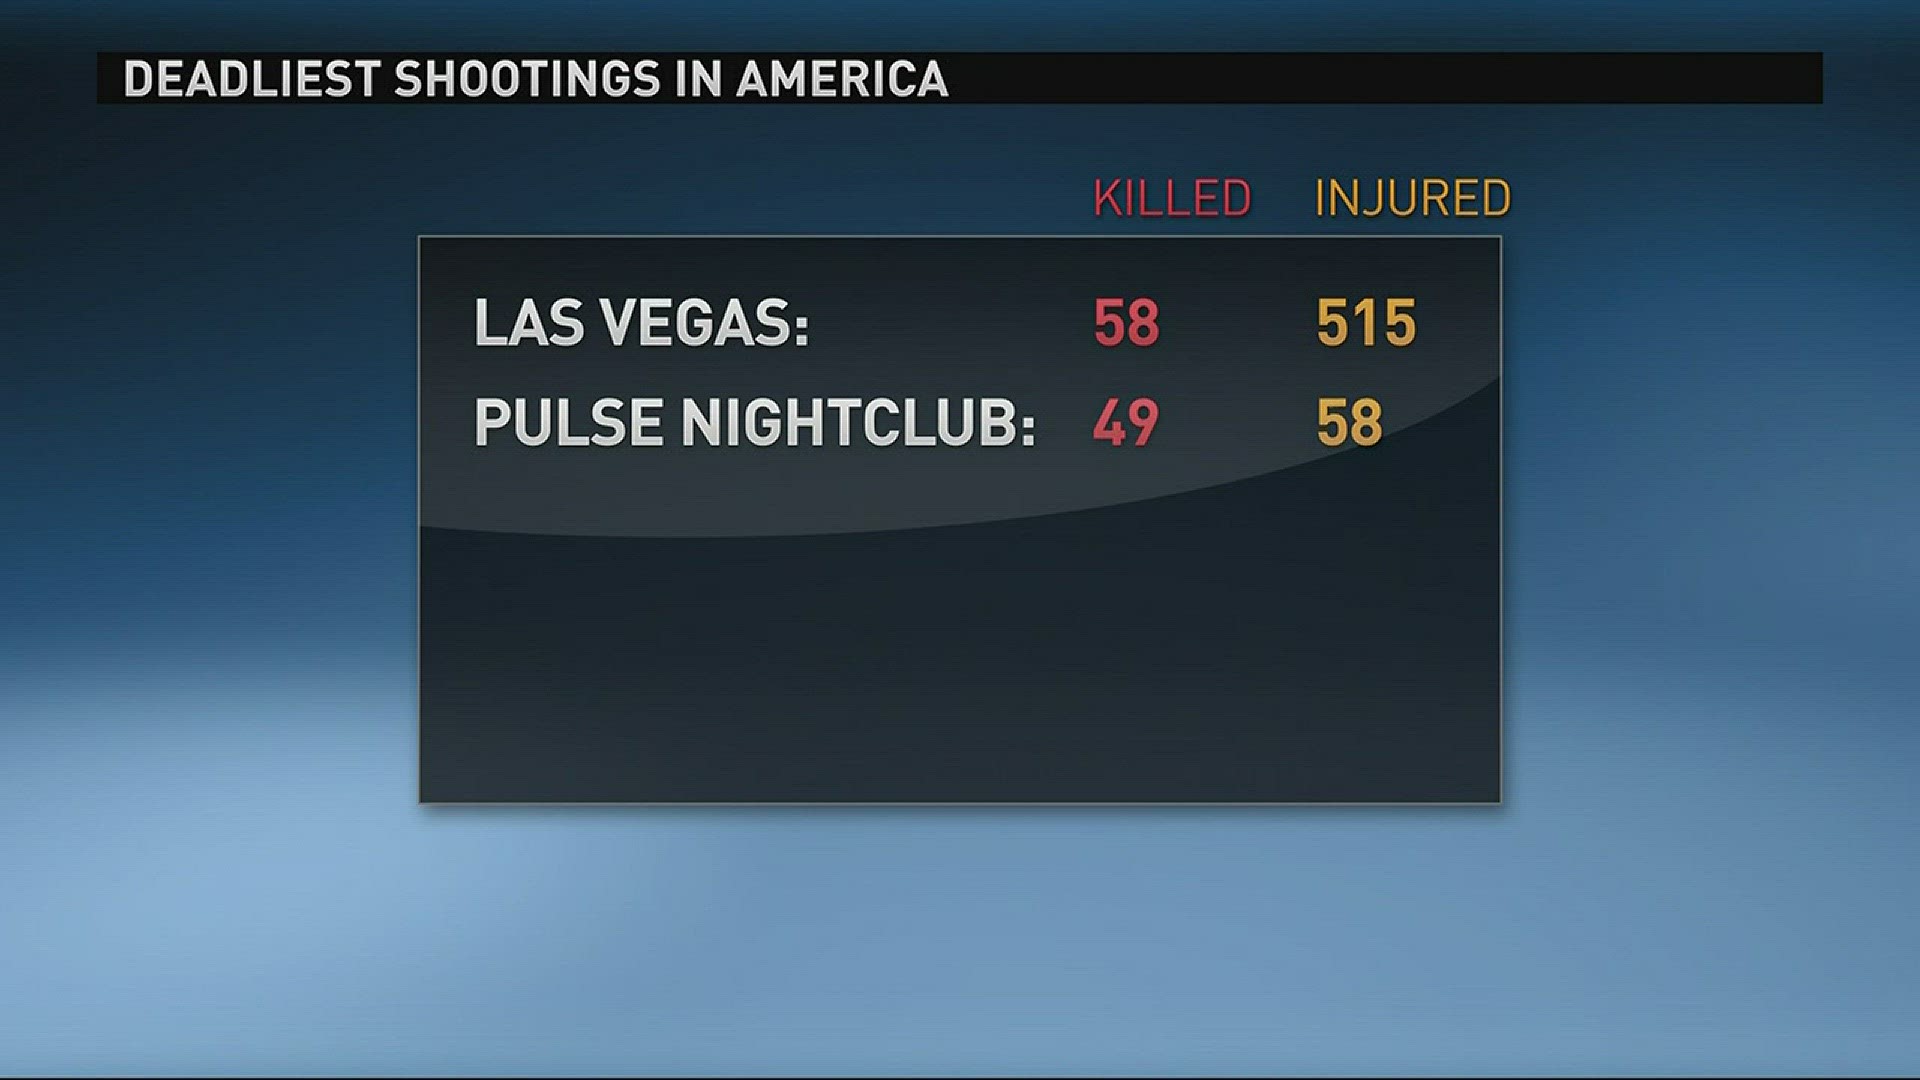 As we've been telling you -- the massacre in Las Vegas is now the deadliest shooting in American history. Before that, it was the Pulse Nightclub tragedy in Orlando, where 49 people were killed.